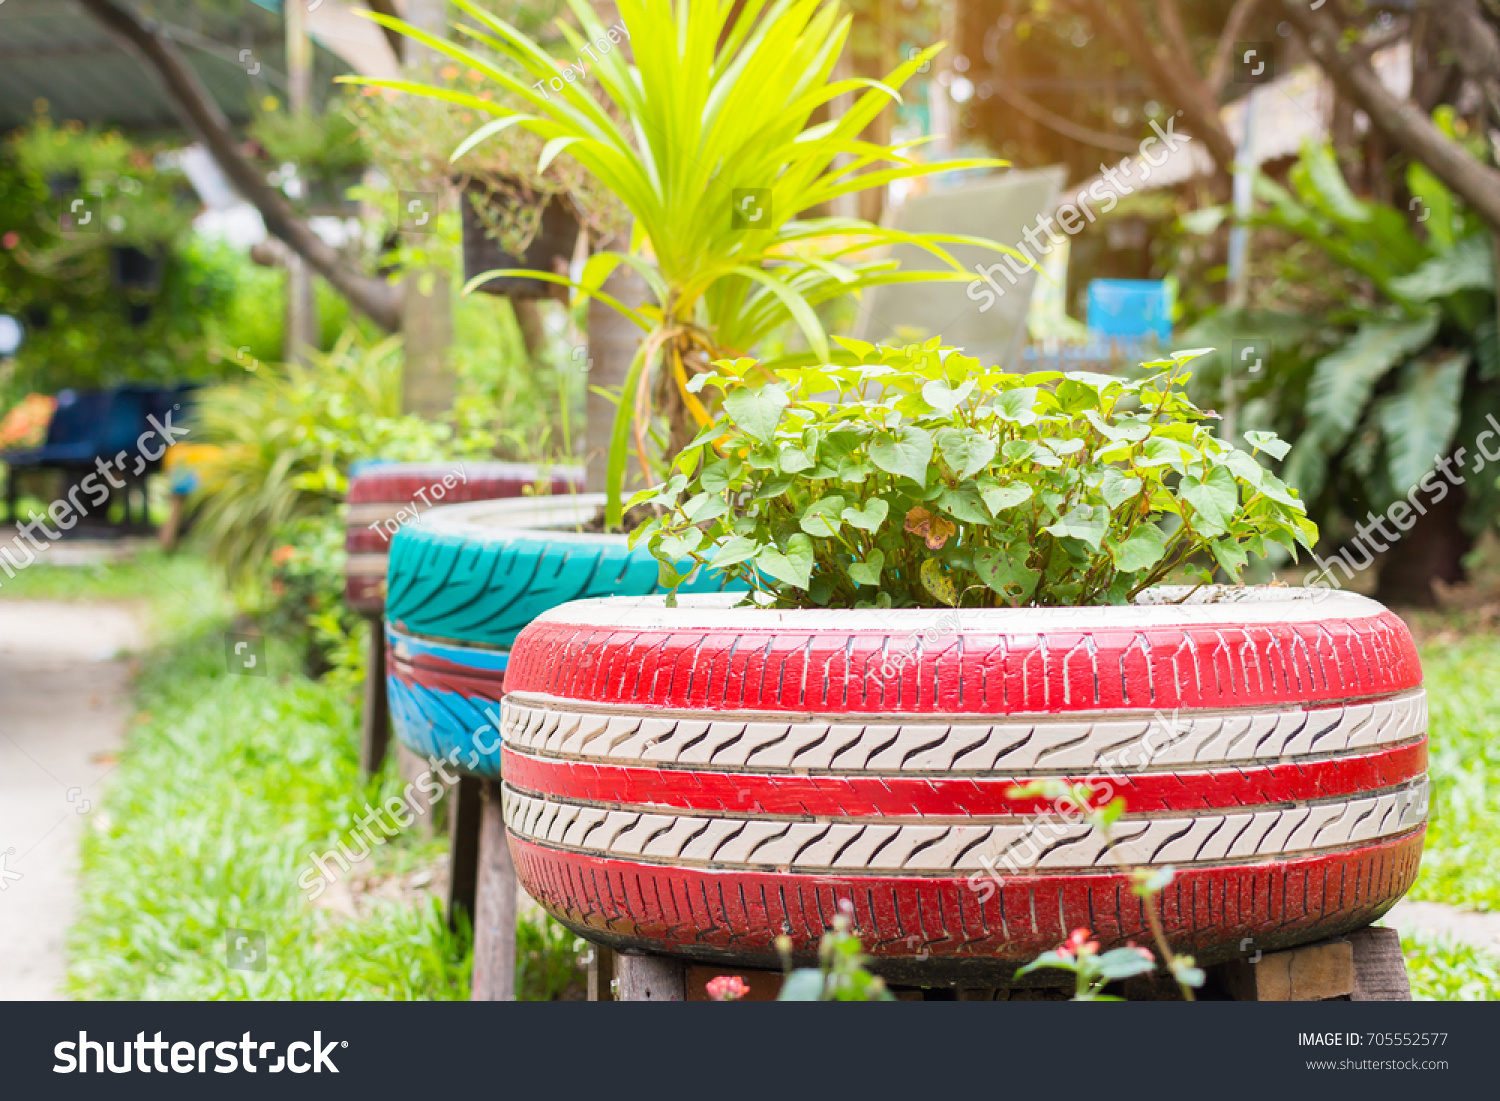 the organic plants were growth in the recycle painted tires in the garden #705552577